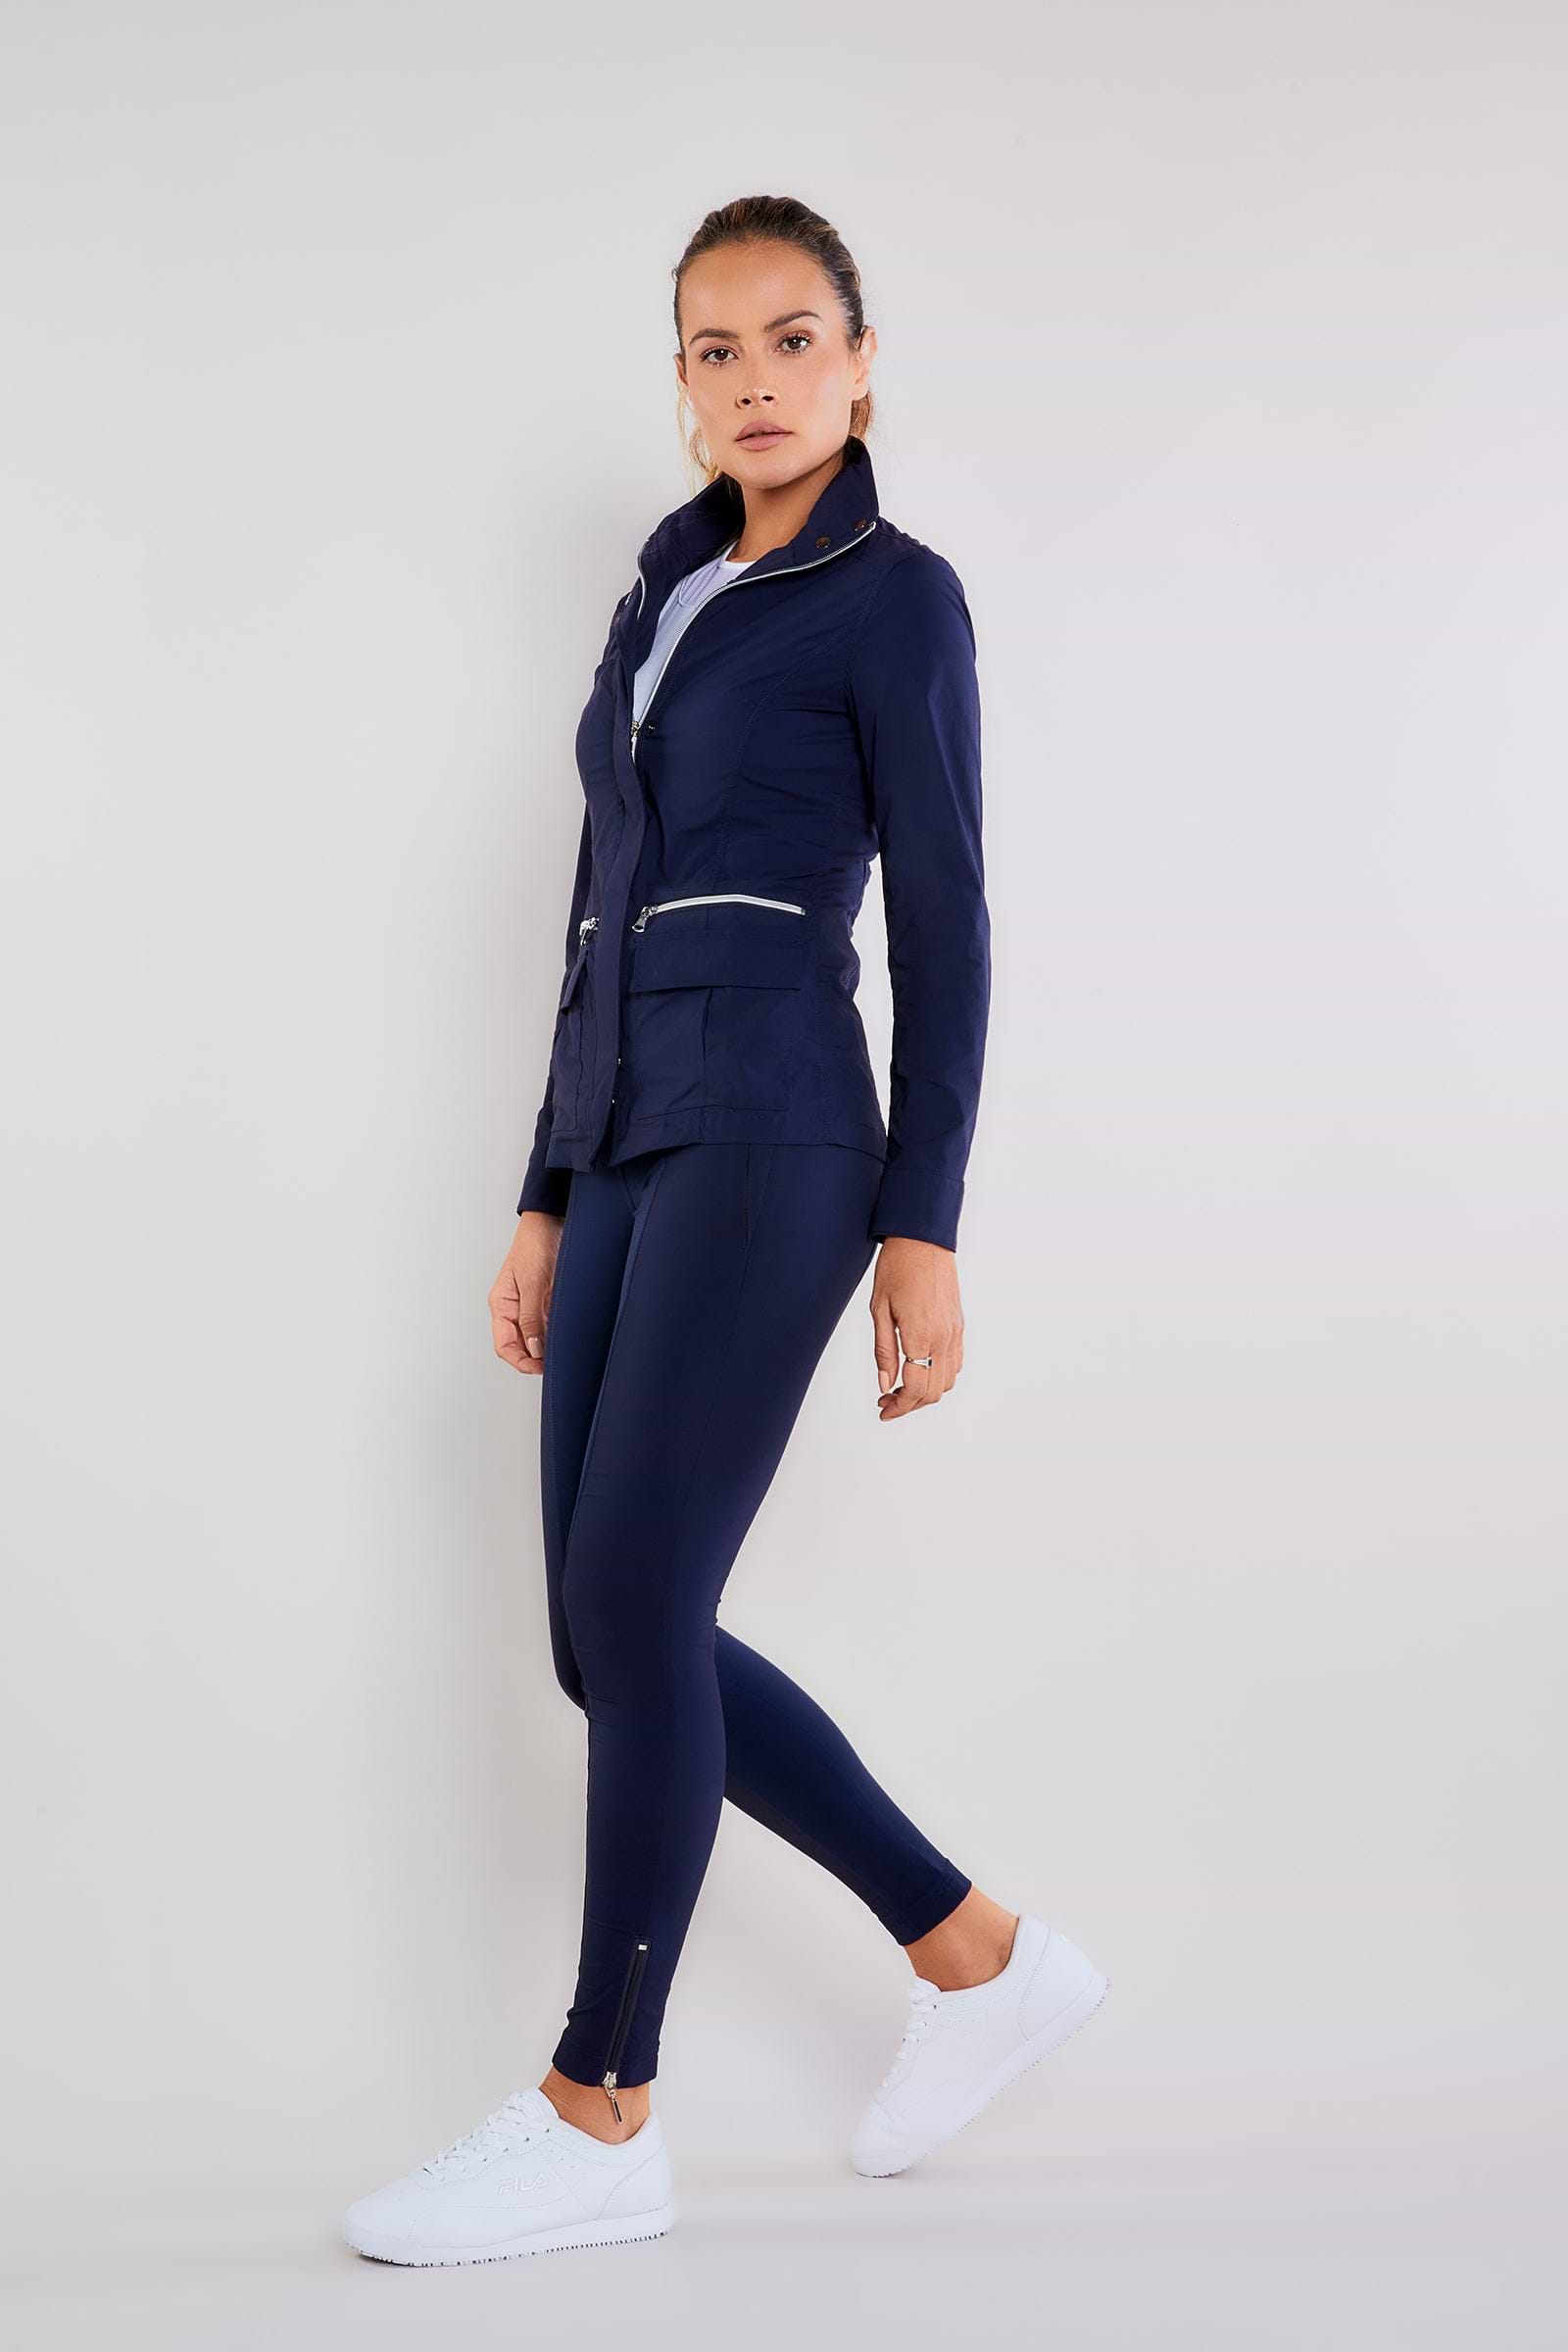 The Best Travel Pants. Woman Showing the Side Profile of the Allie Pant in Navy